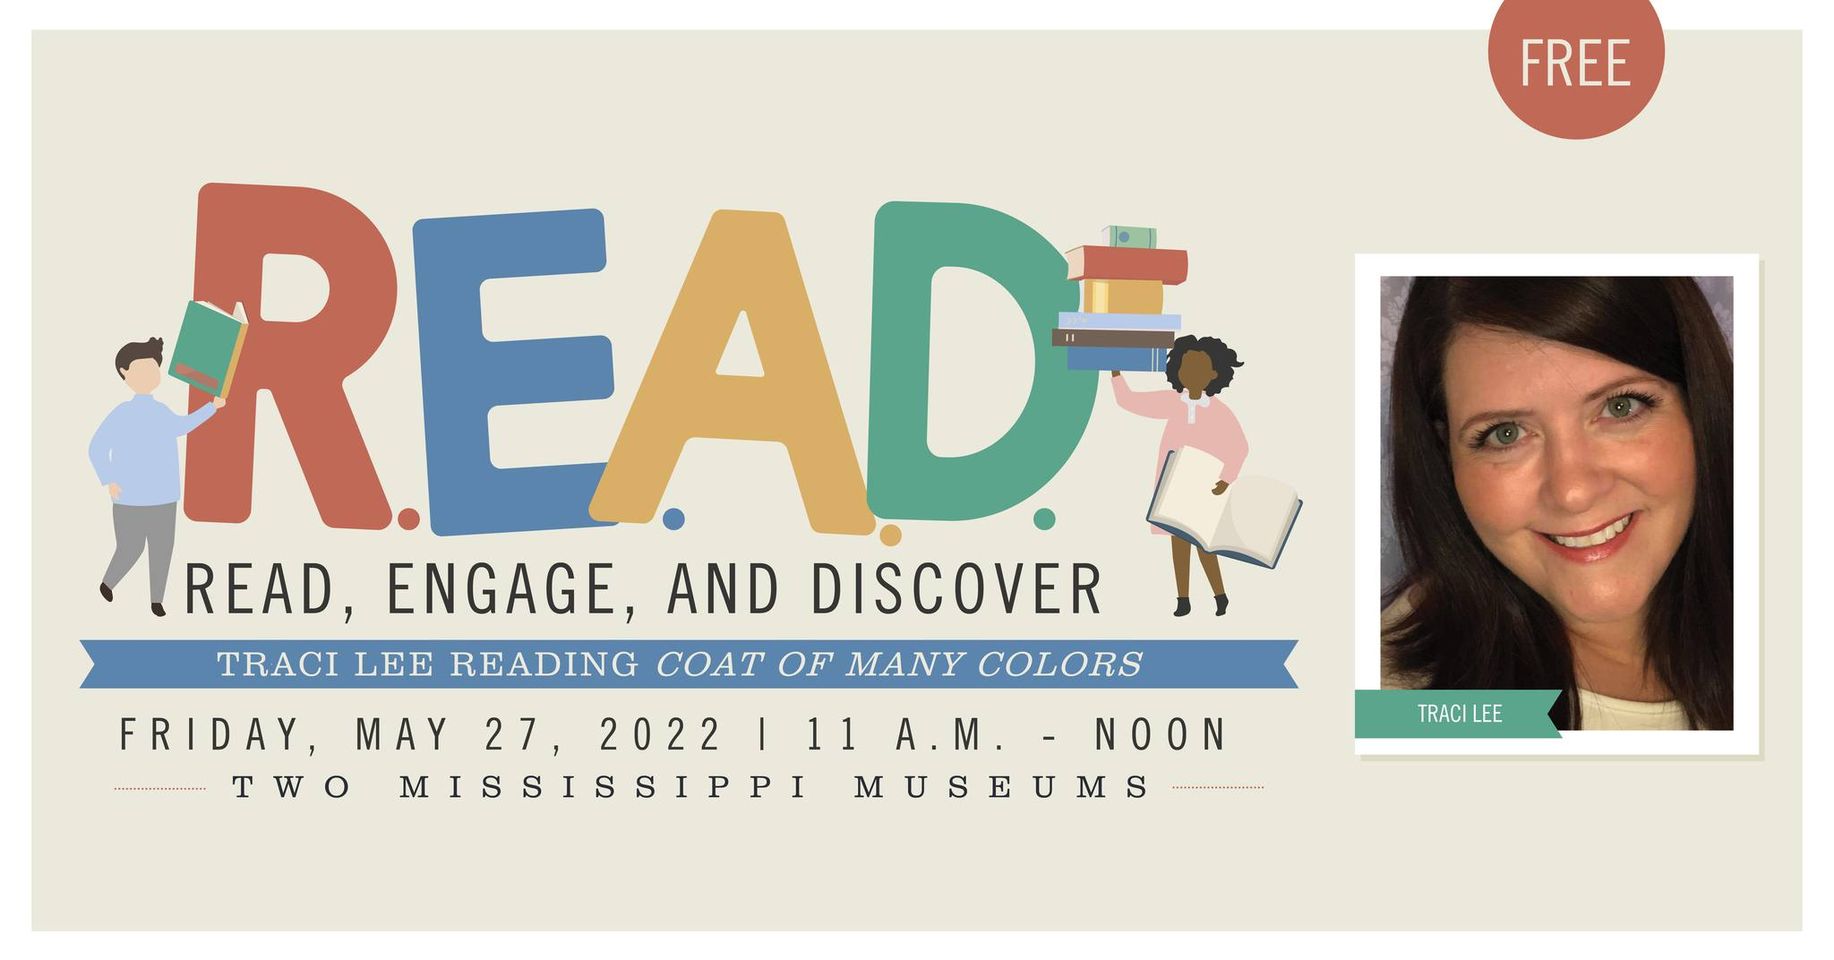 R.E.A.D. (Read, Engage, & Discover)